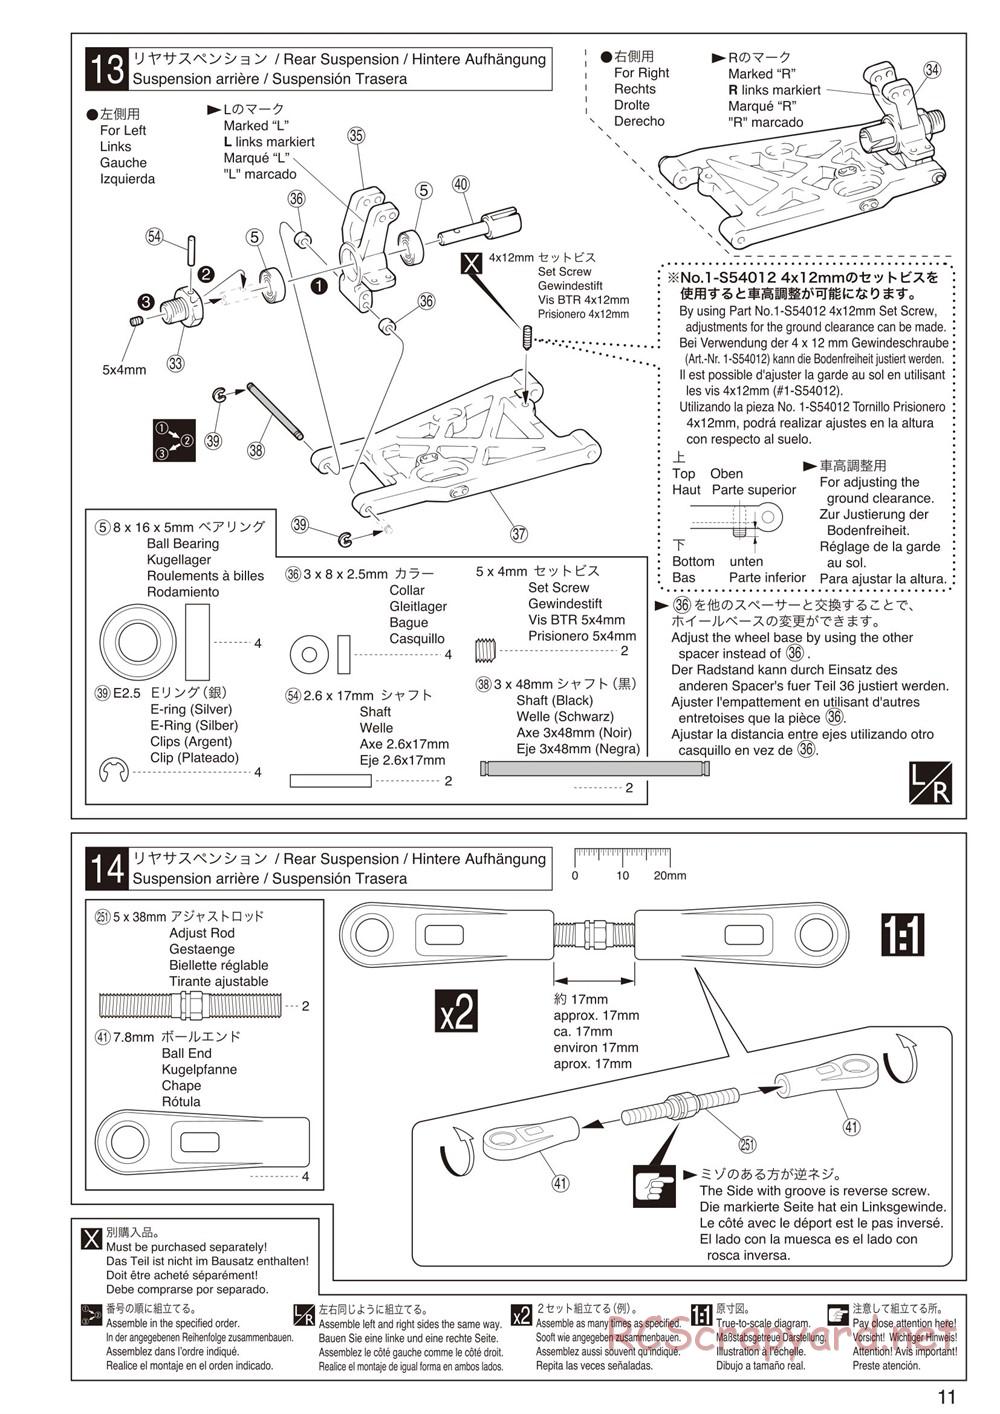 Kyosho - Inferno Neo 2.0 - Manual - Page 11